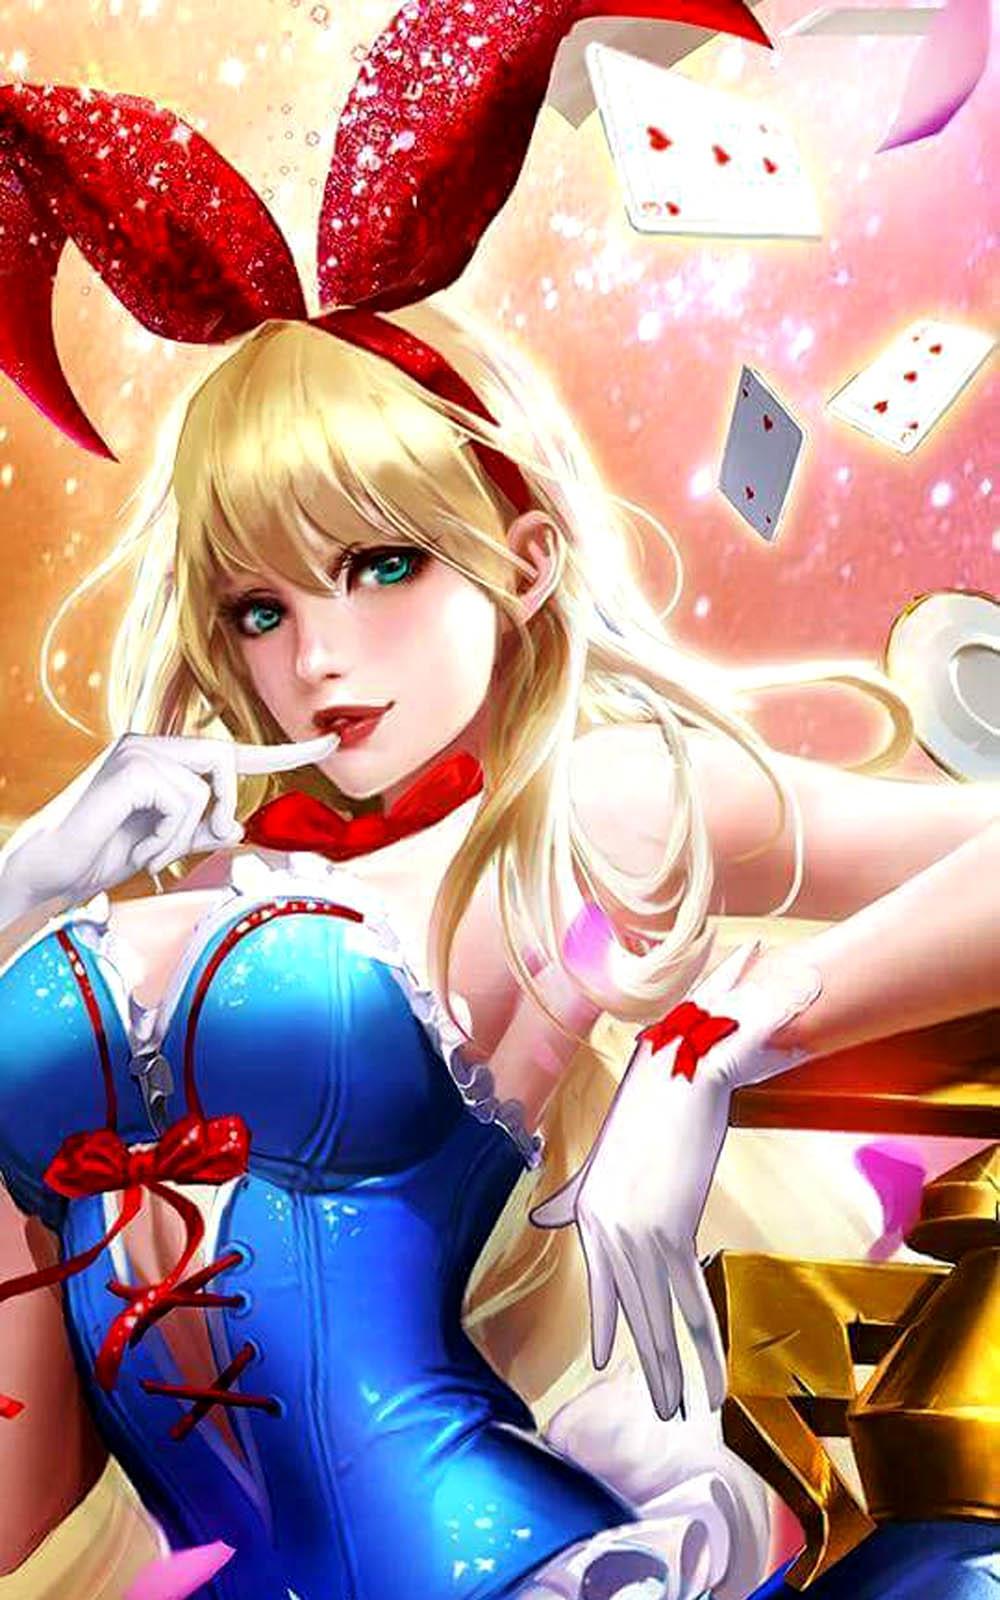 Download The Bunny Girl Layla Mobile Legends Free Pure 4K